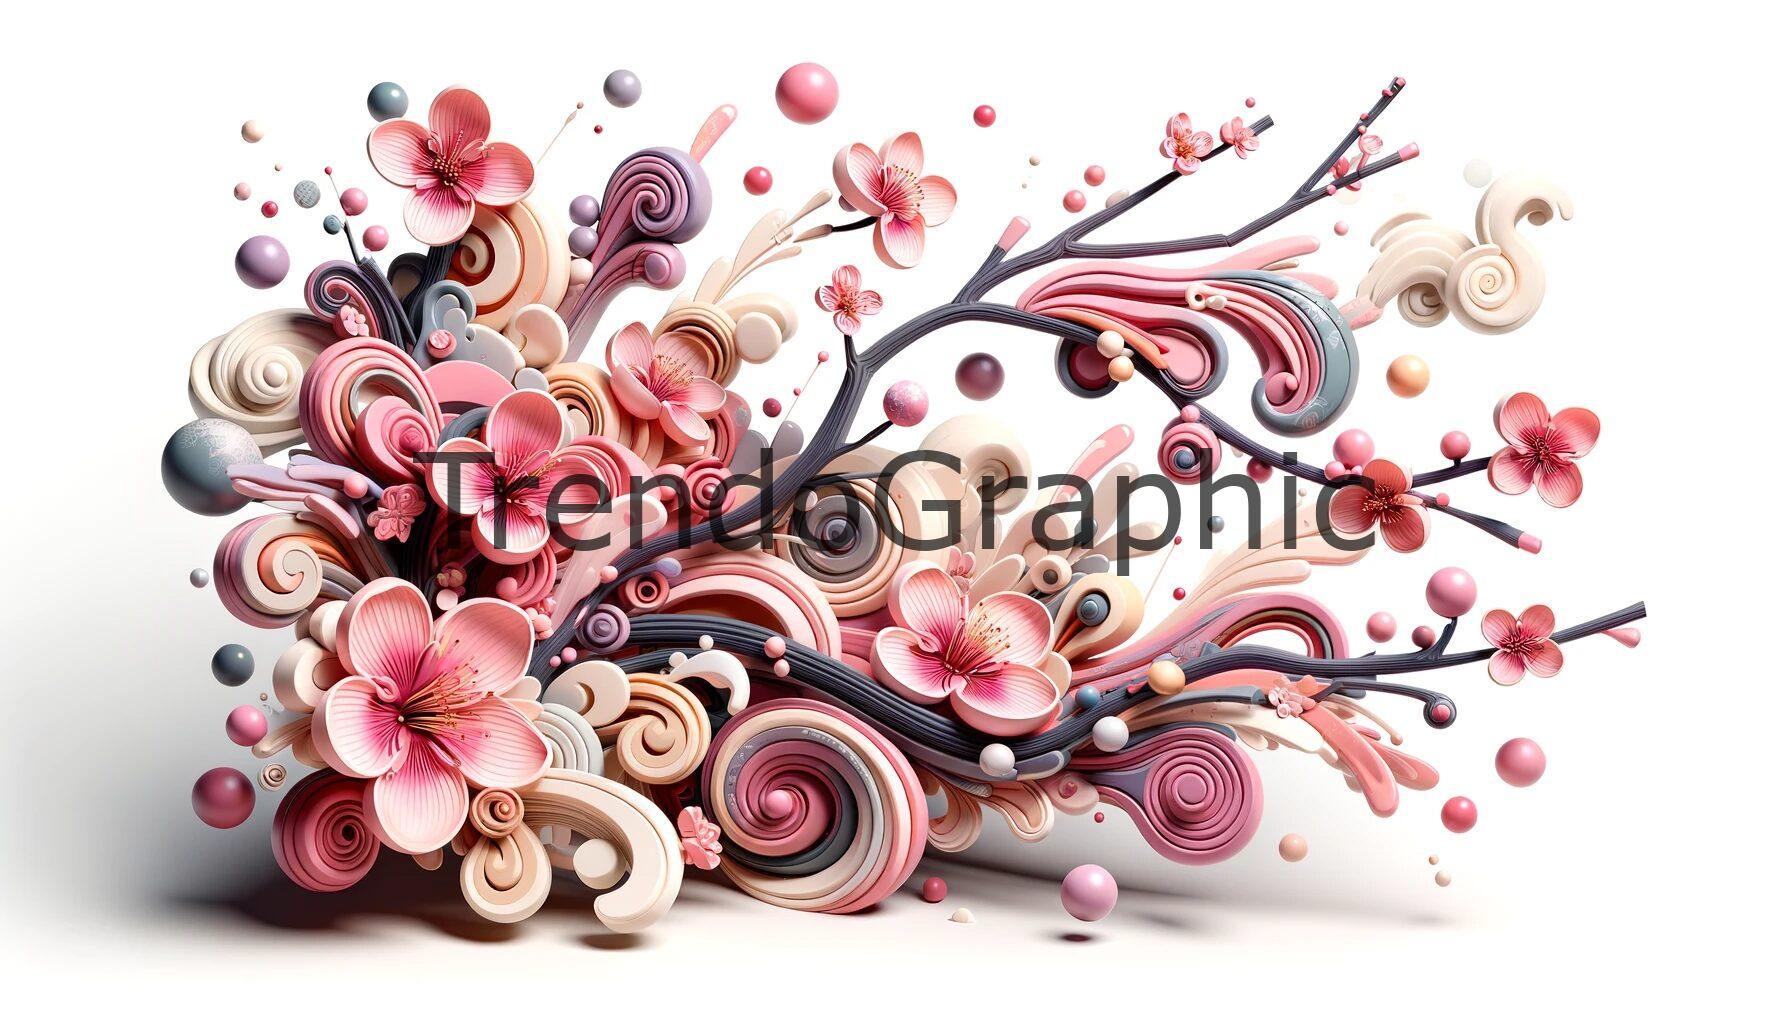 Abstract Cherry Blossom Artwork: A Whimsical Display